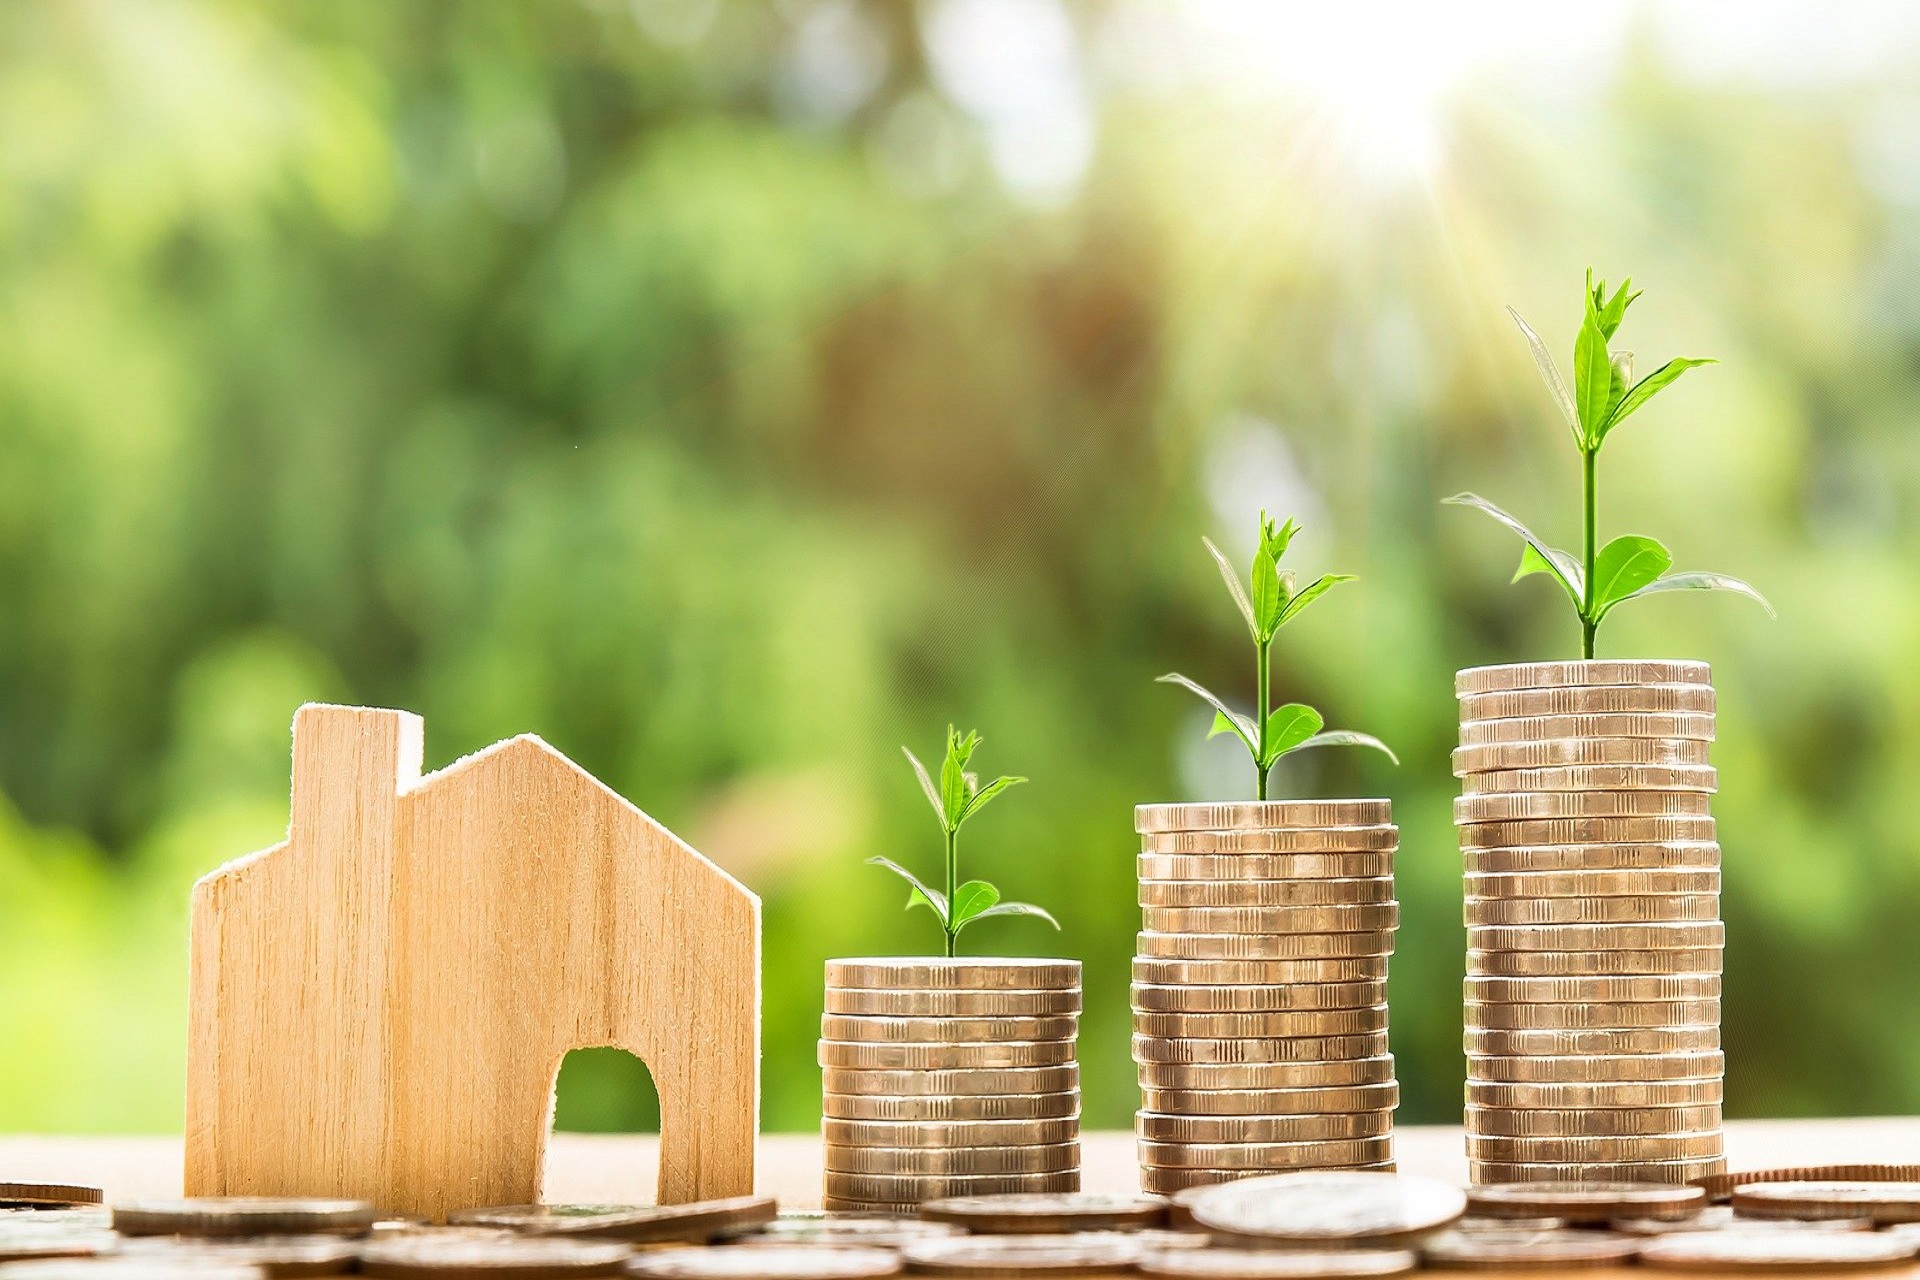 Financial Advice For Homebuyers In 2022